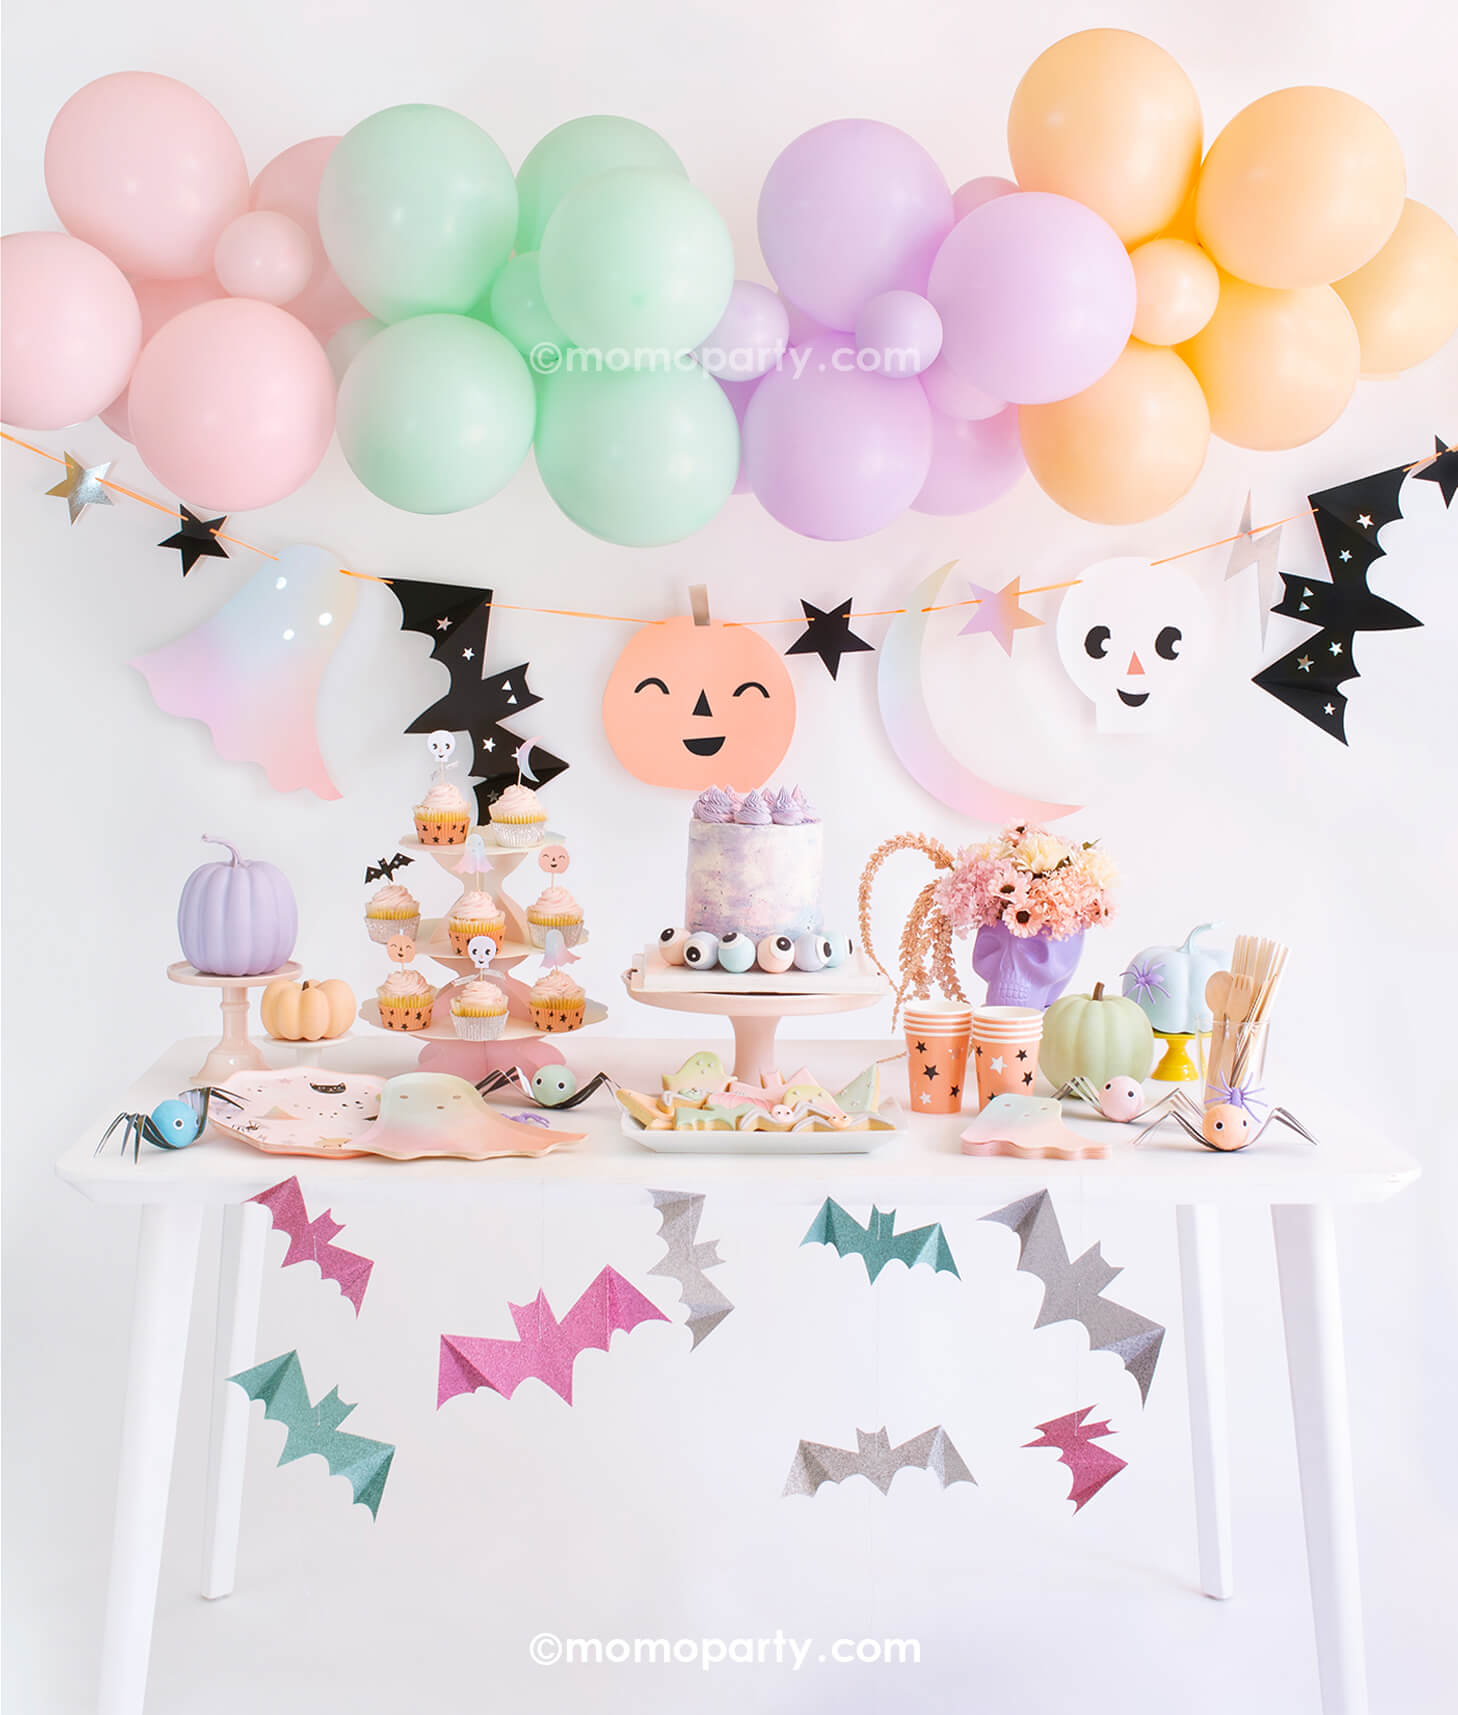 Momo Party Pastel Halloween Box Kit. Set up with Meri Meri Pastel Halloween Dinner Plates, Pastel Ombre Halloween Ghost Plates, Pastel Halloween Star Pattern Cups, Pastel Ombre Halloween Ghost Napkins, Wooden Cutlery, Iridescent Party Straws, Pastel Halloween Cupcake Kit  with 24 toppers, cake with eyeballs in the pink cake stand, skull head with flowers, spider surprise balls on the table. Pastel Halloween Glitter Hanging Bats, Pastel Balloon Cloud and Pastel Halloween Garland Set as decoration 